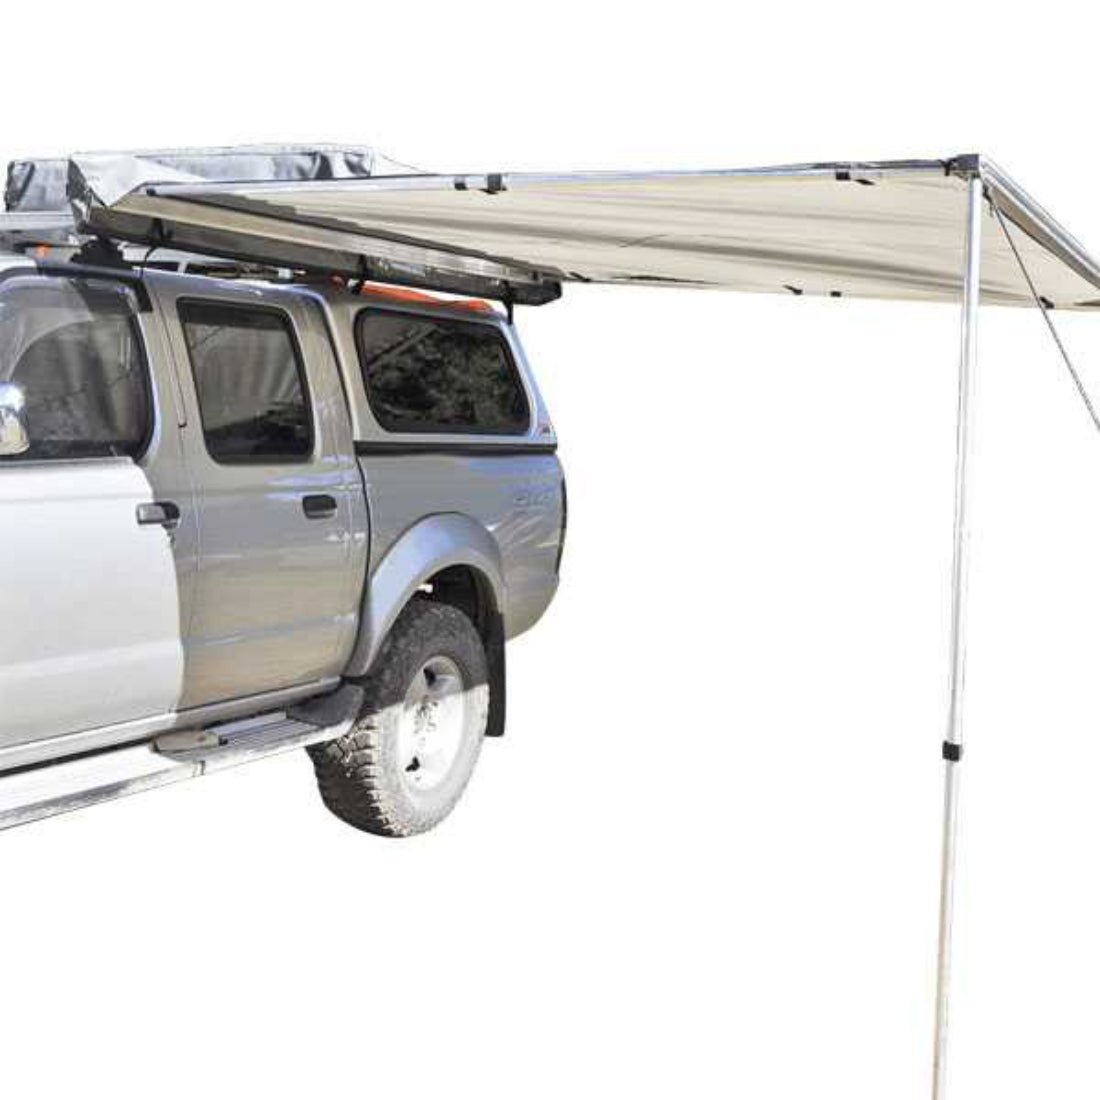 3m x 3m 4WD Waterproof Pull Out Car Awning Shade Camping Trailer